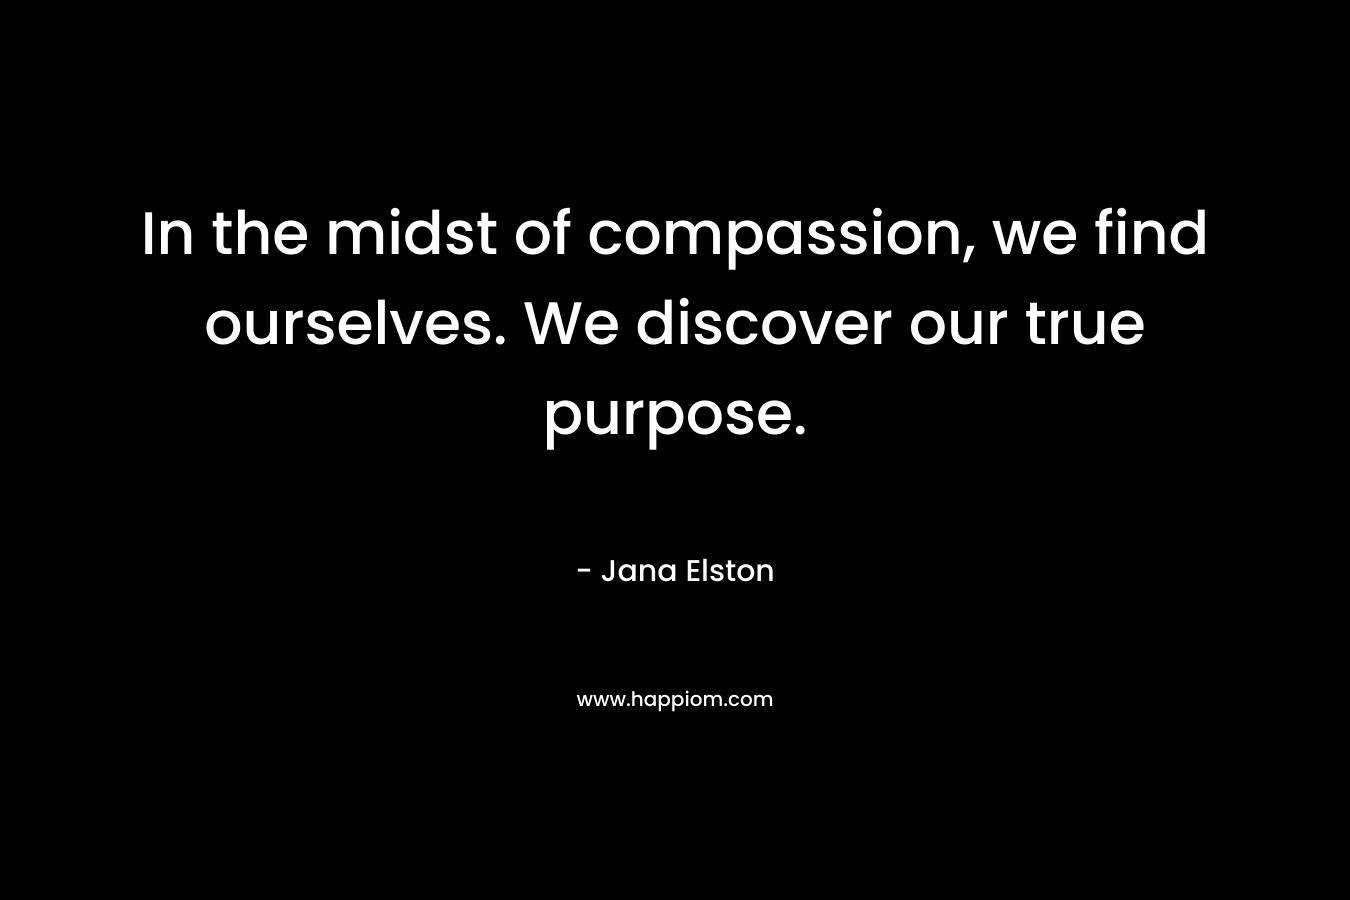 In the midst of compassion, we find ourselves. We discover our true purpose. – Jana Elston